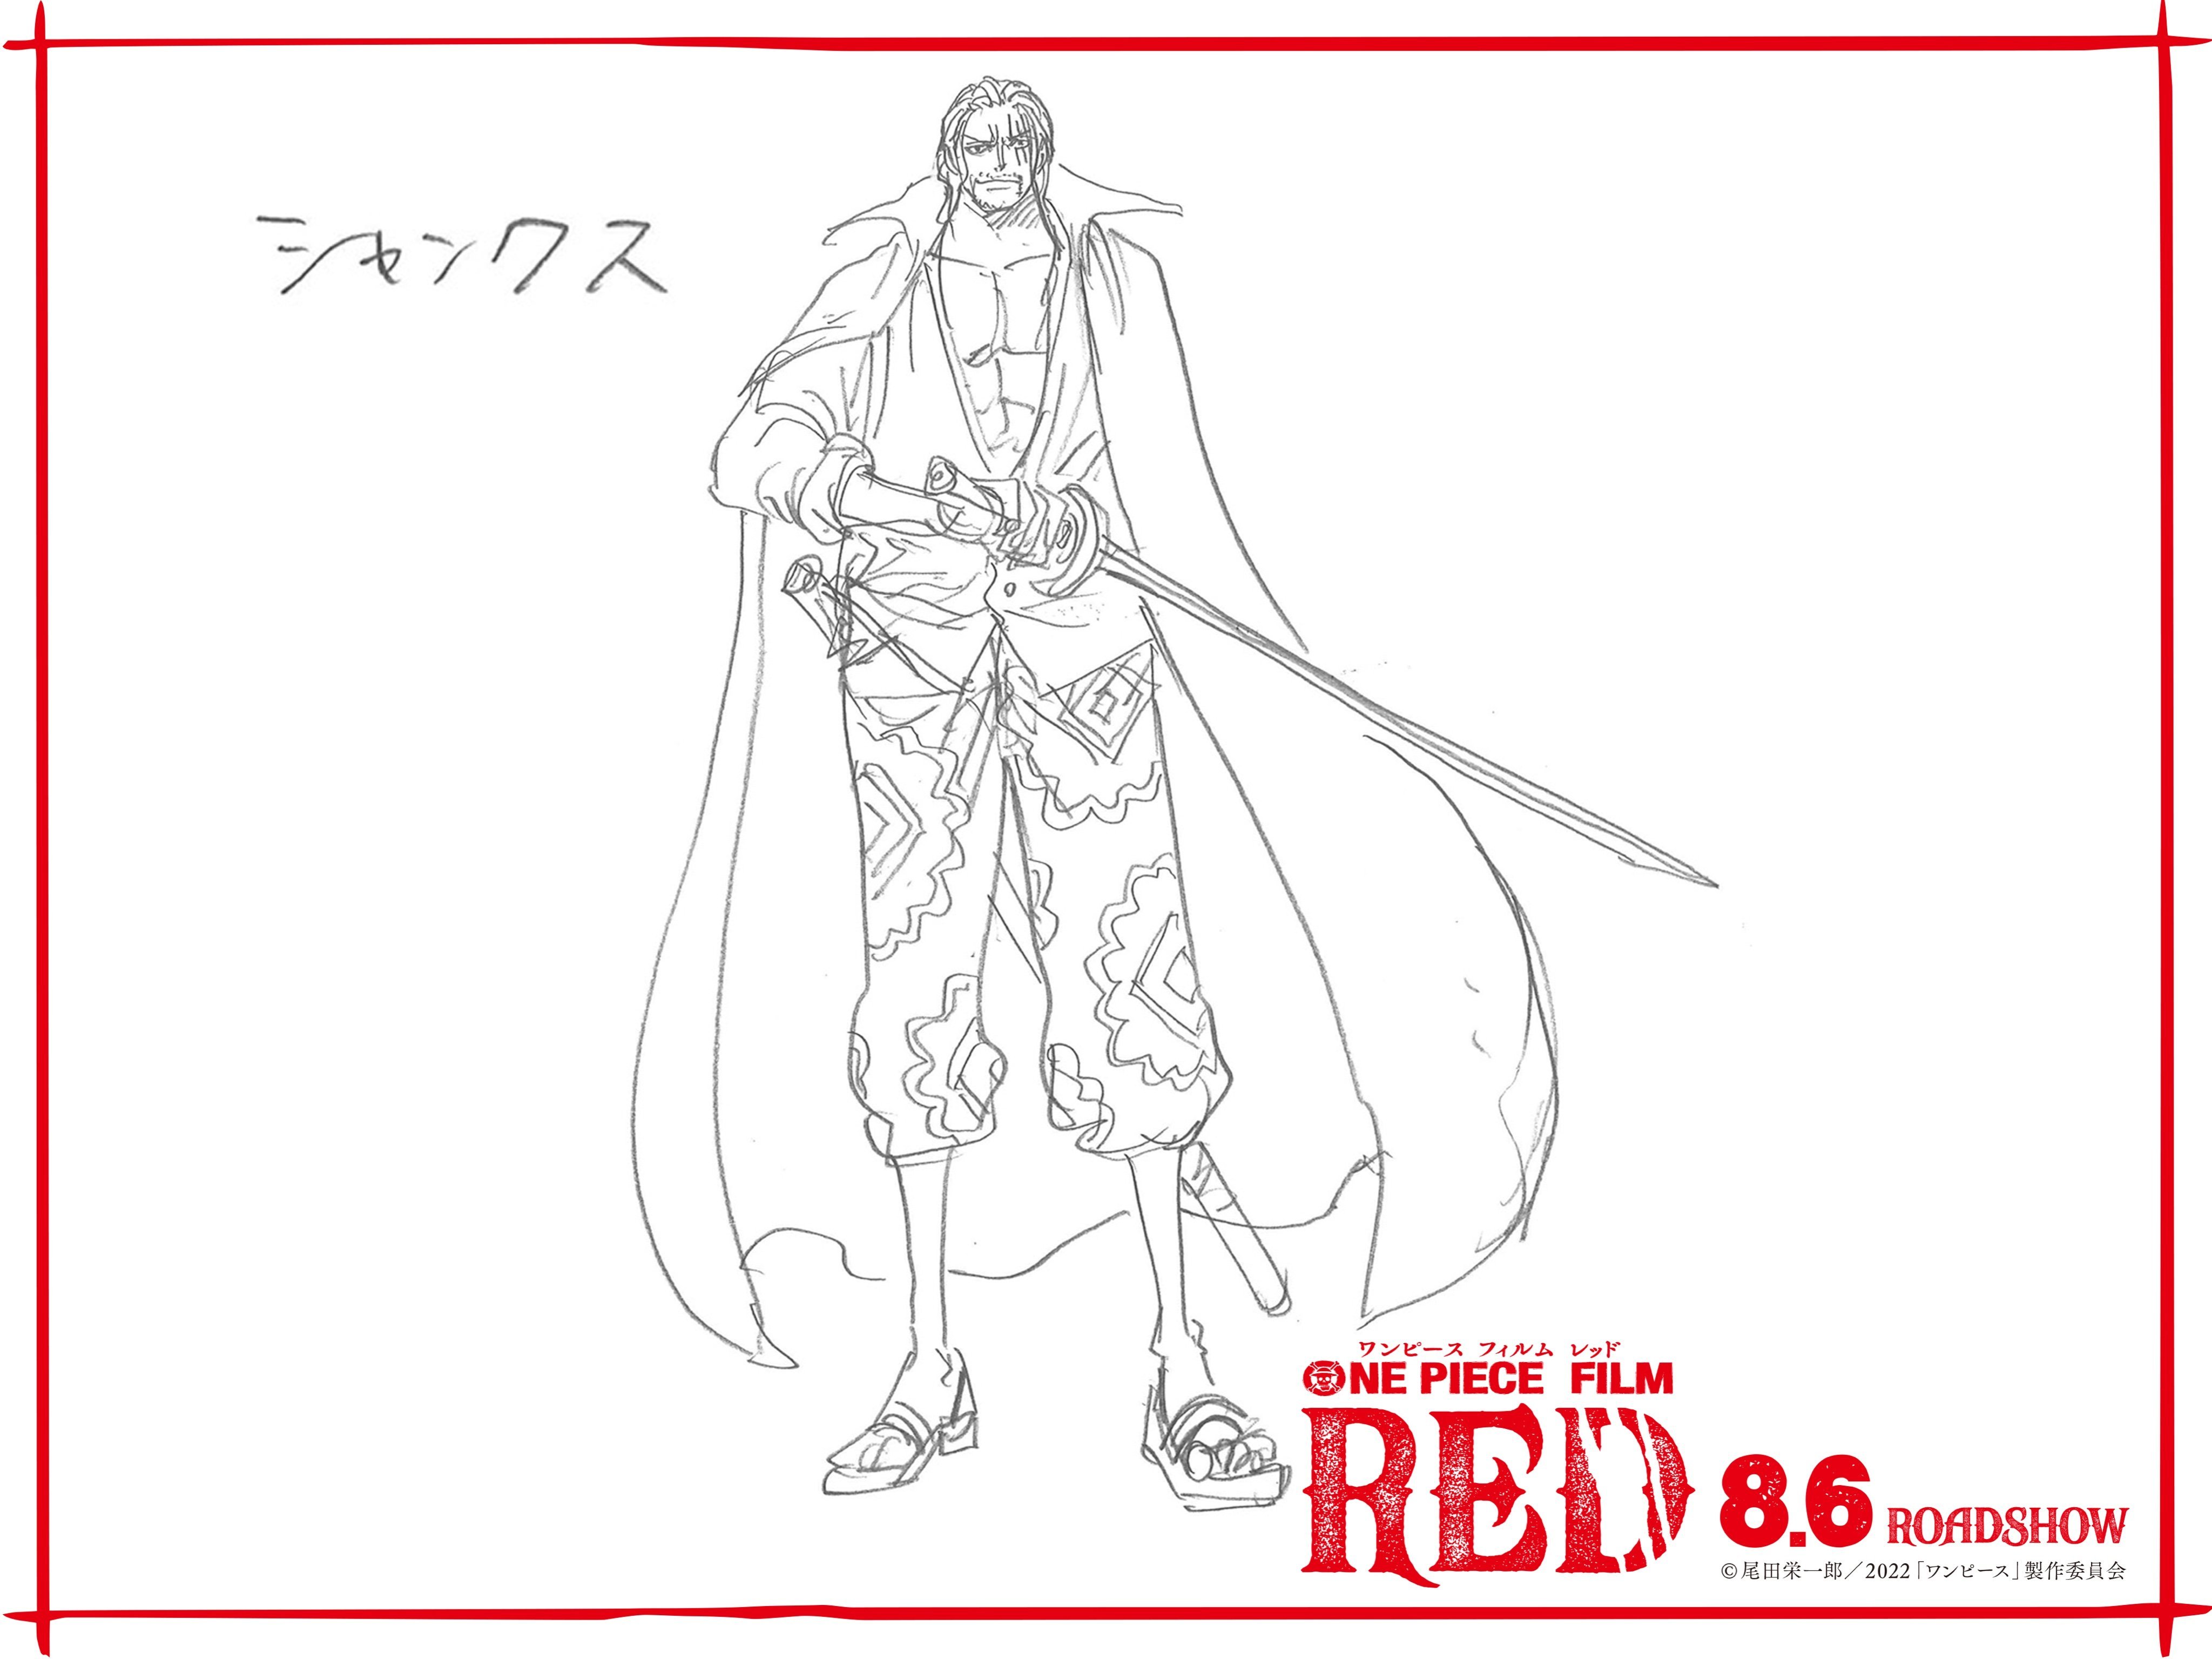 Artur - Library of Ohara on X: Sketch of Shanks in One Piece Film